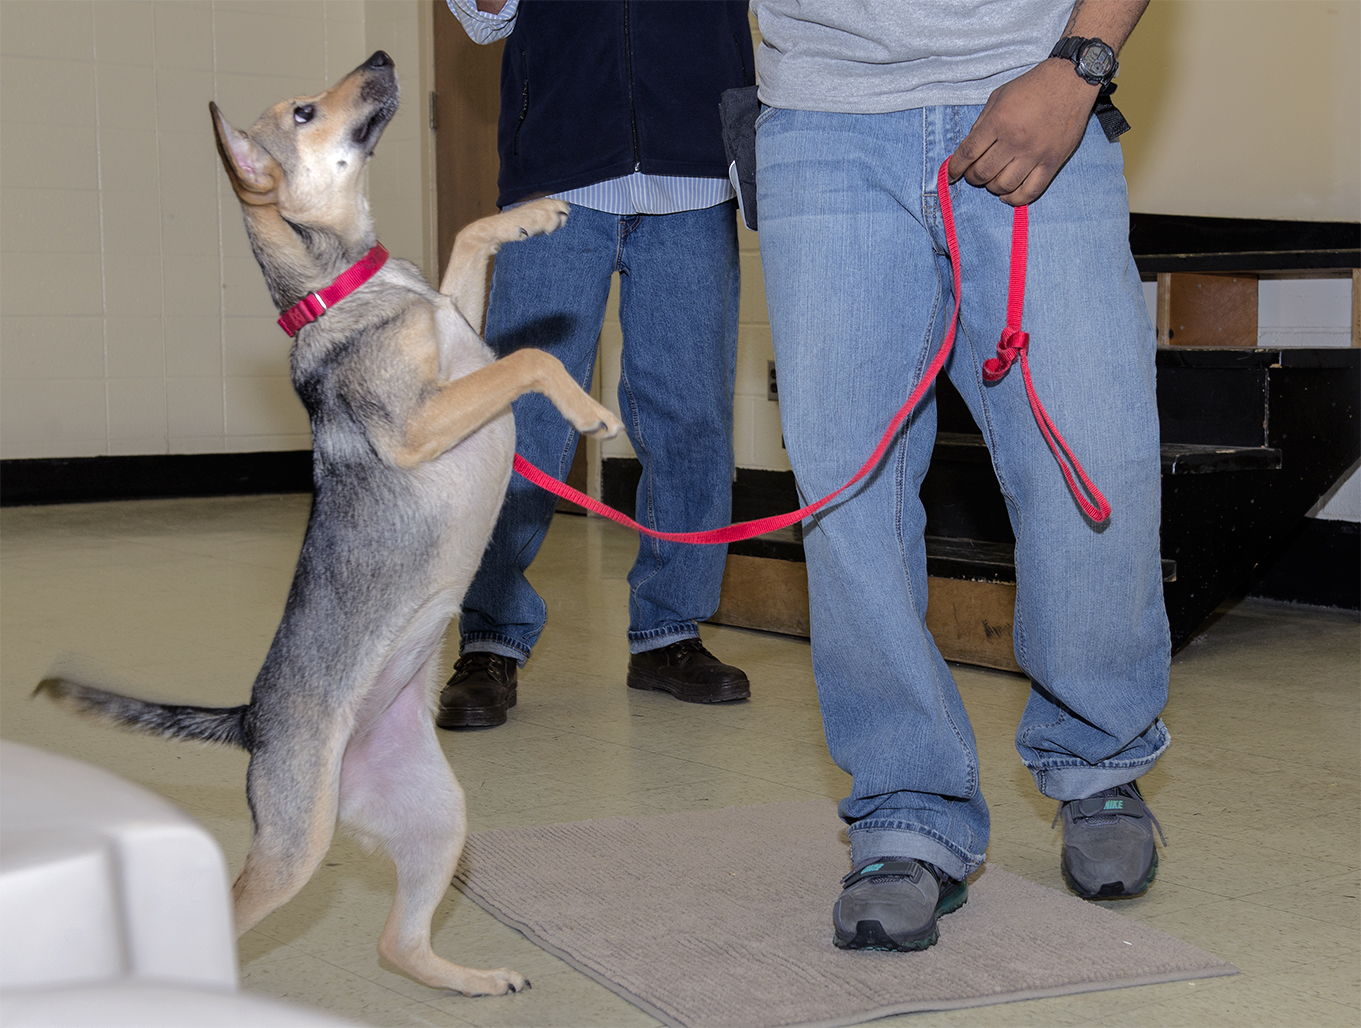 Miley, a 9-month old female Terrier mix, practices standing on two legs. (Photo courtesy of the Washington Animal Rescue League)